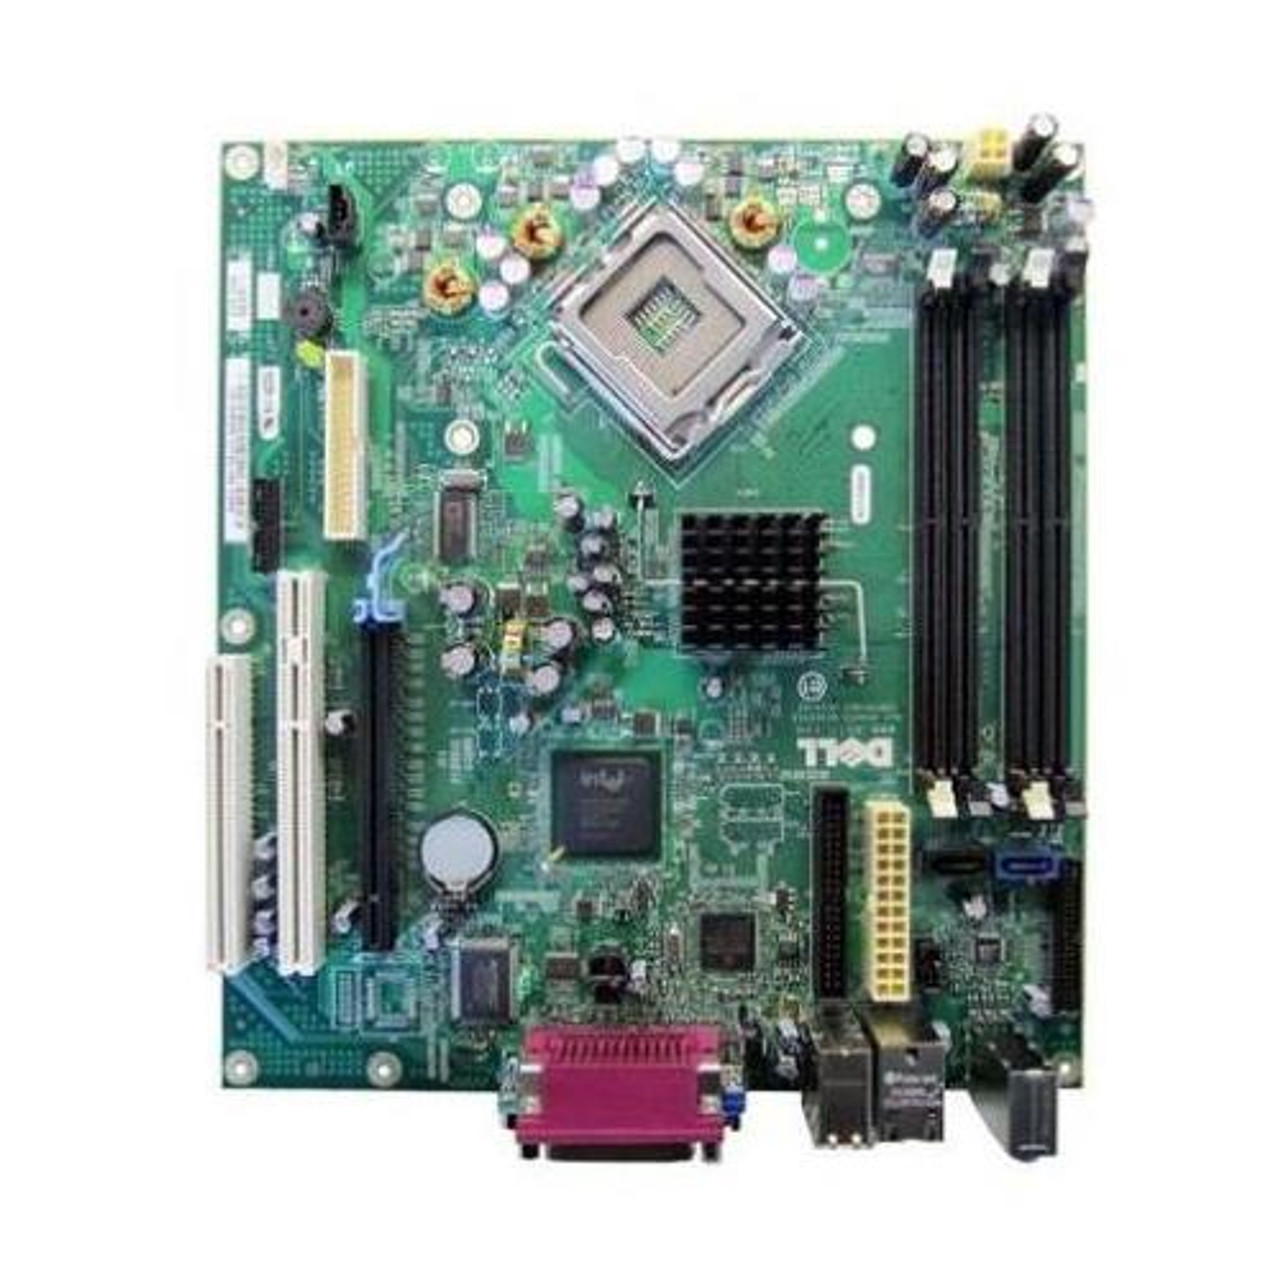 Vwd41 Dell System Board Motherboard With Intel Core I7 2637m Cpu For Alienware M11x R3 Refurbished